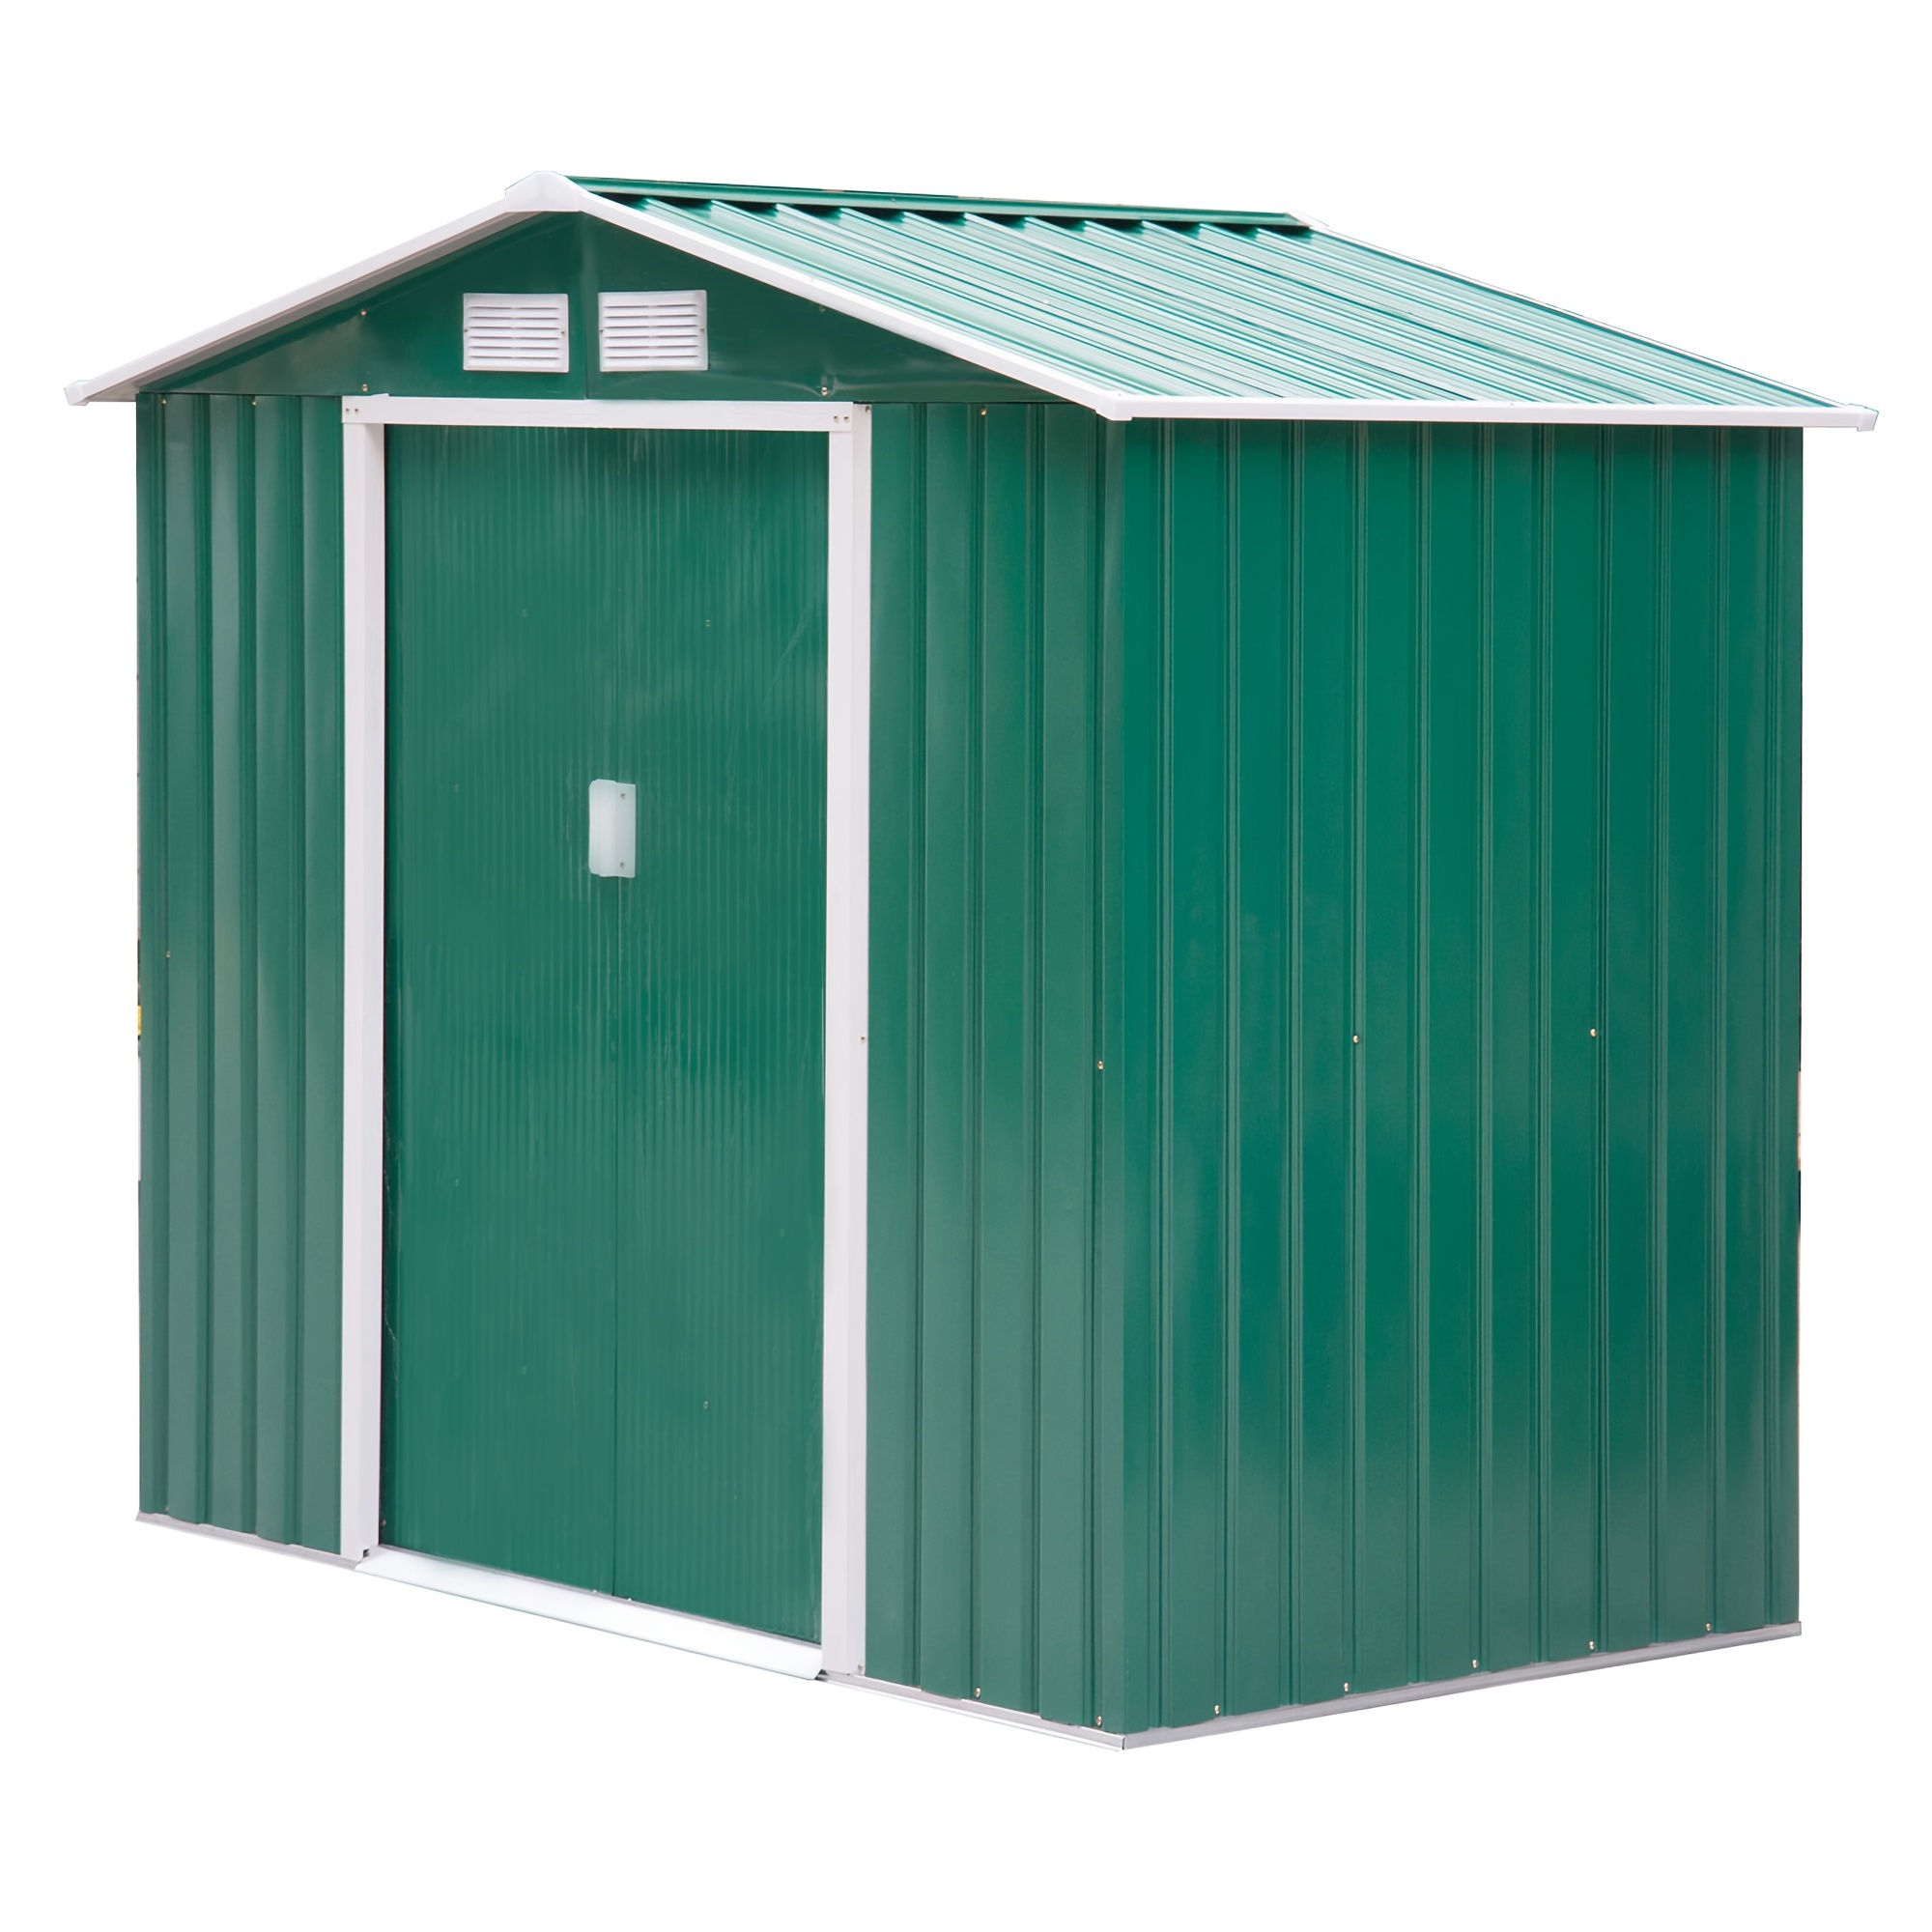 

7' X 4' Outdoor Storage Shed, Garden With Foundation Kit, 4 Vents And 2 Easy Sliding Doors For Backyard, Patio, Garage, Lawn